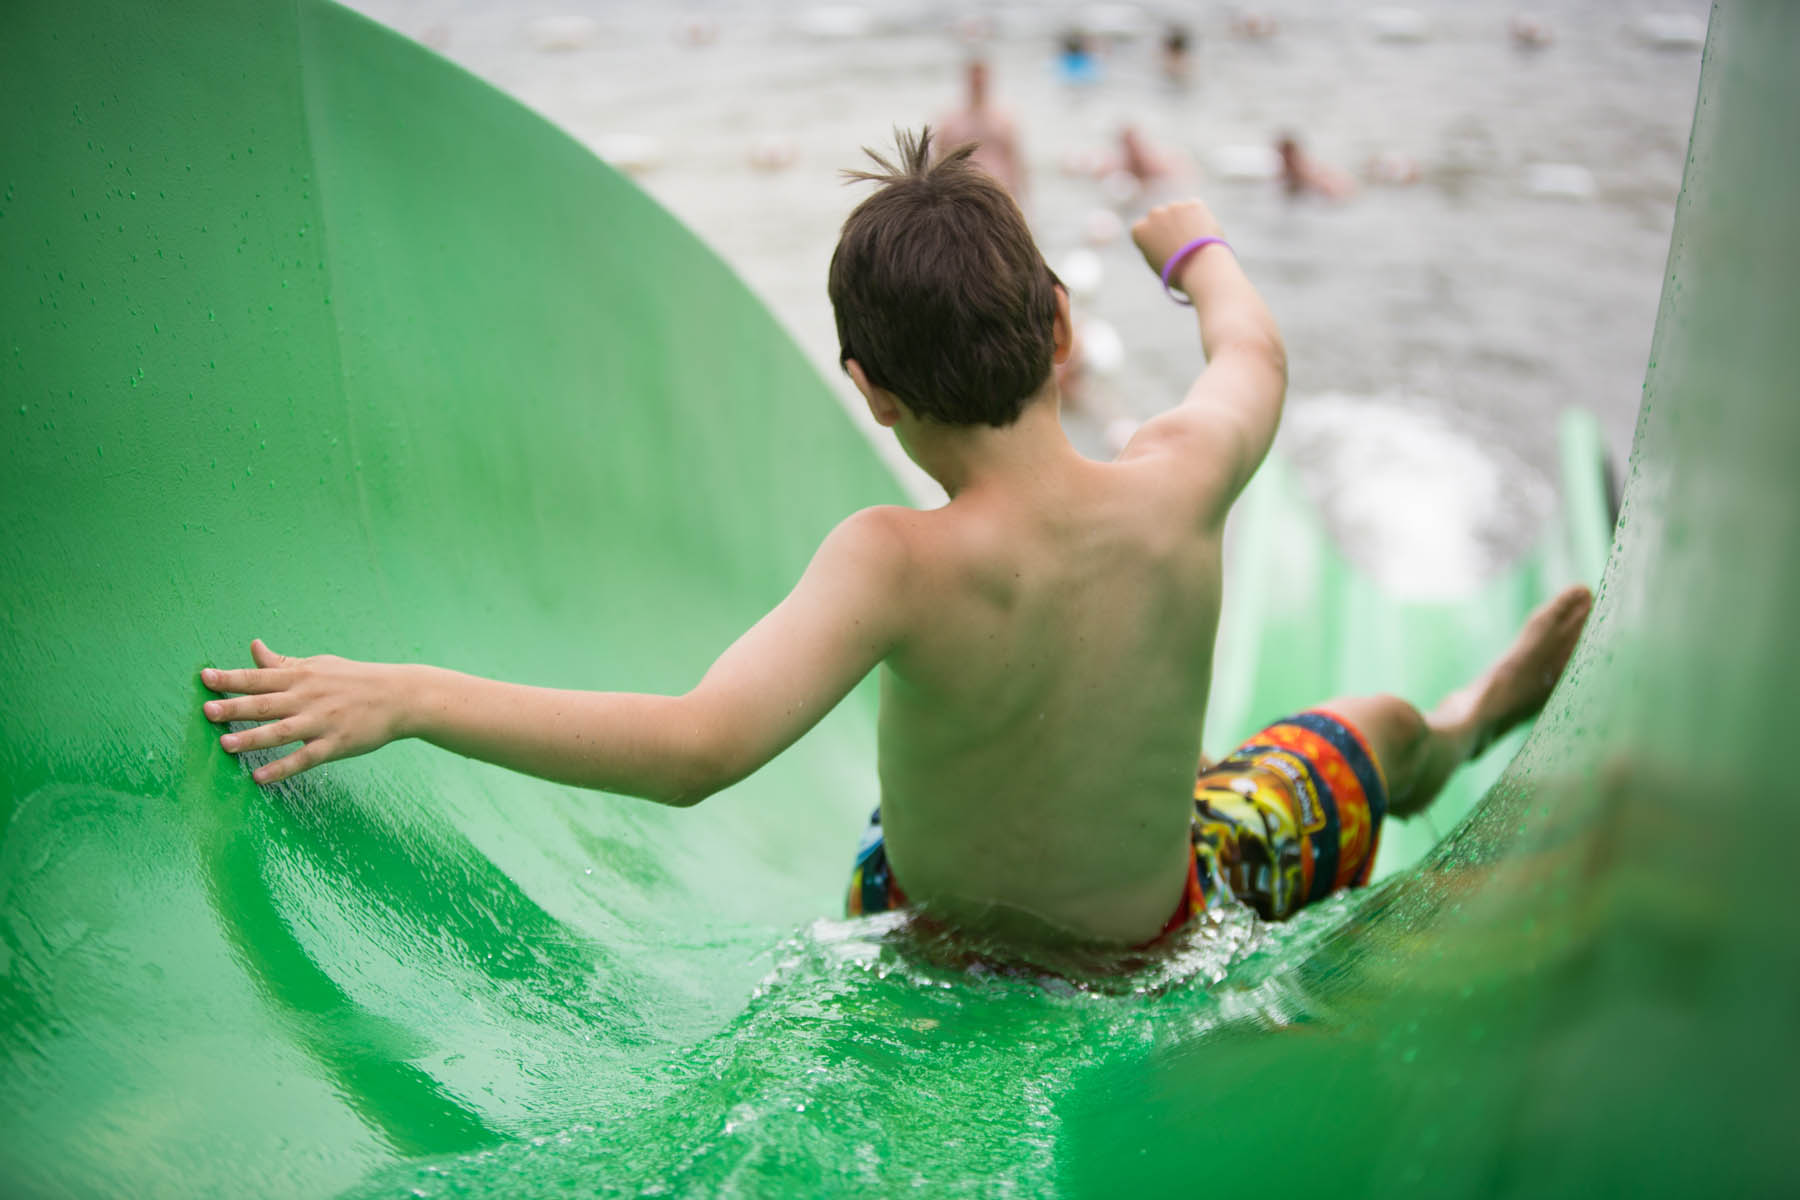 Young boy on a green waterslide